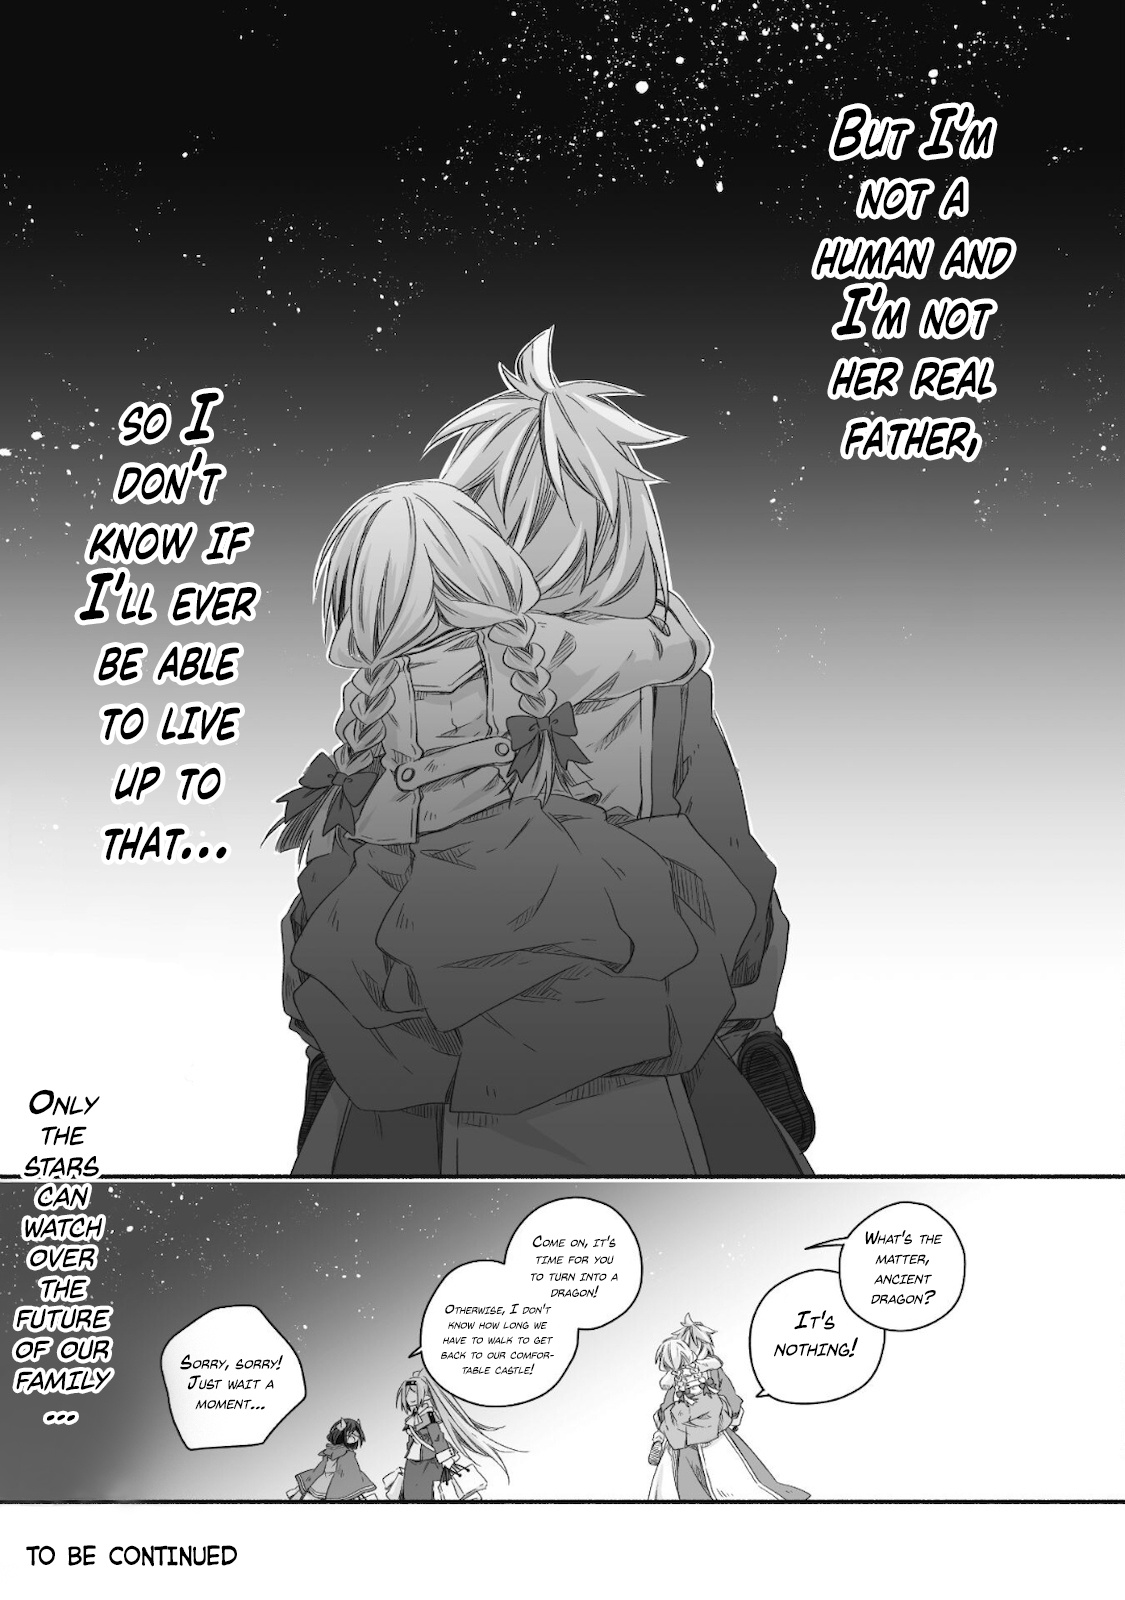 Parenting Diary Of The Strongest Dragon Who Suddenly Became A Dad ～ Cute Daughter, Heartwarming And Growing Up To Be The Strongest In The Human World ～ - 11 page 26-8965b93f